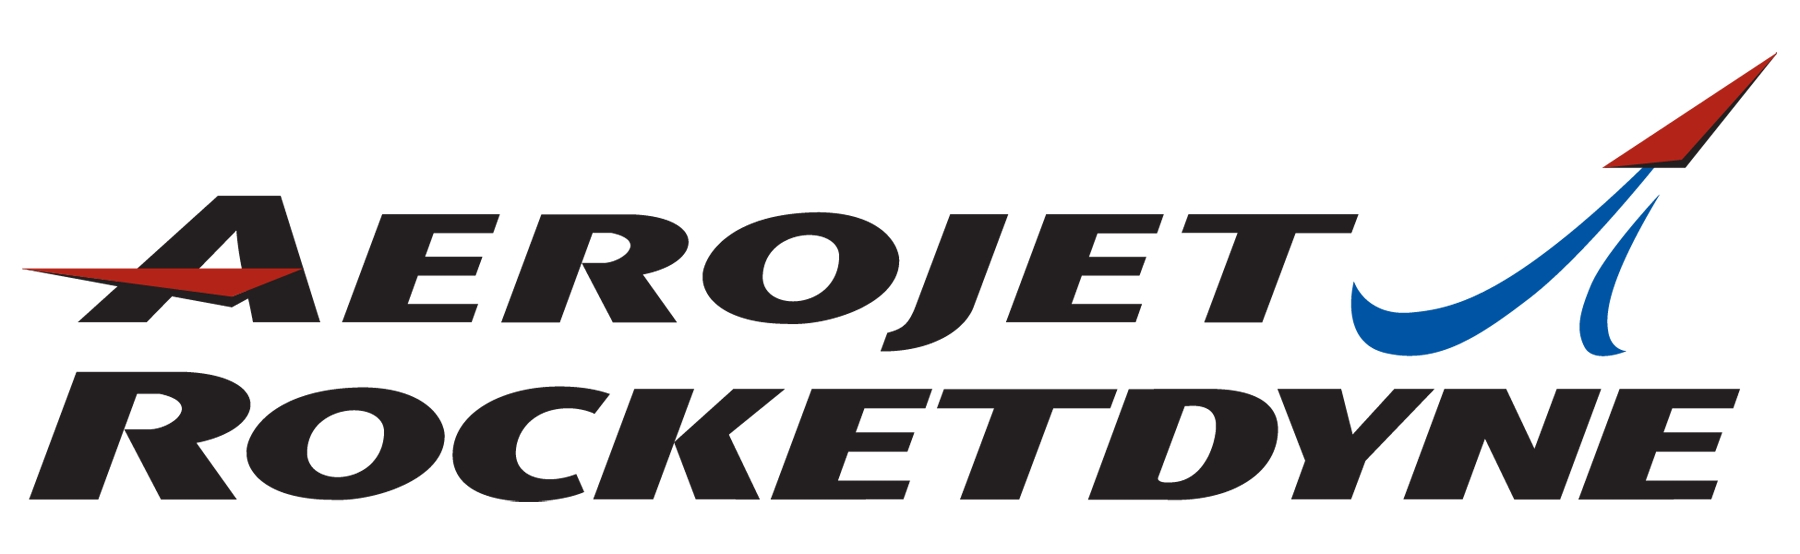 Aerojet Rocketdyne to Provide Additional Armor-Piercing Components for M1 Abrams Main Battle Tank Rounds